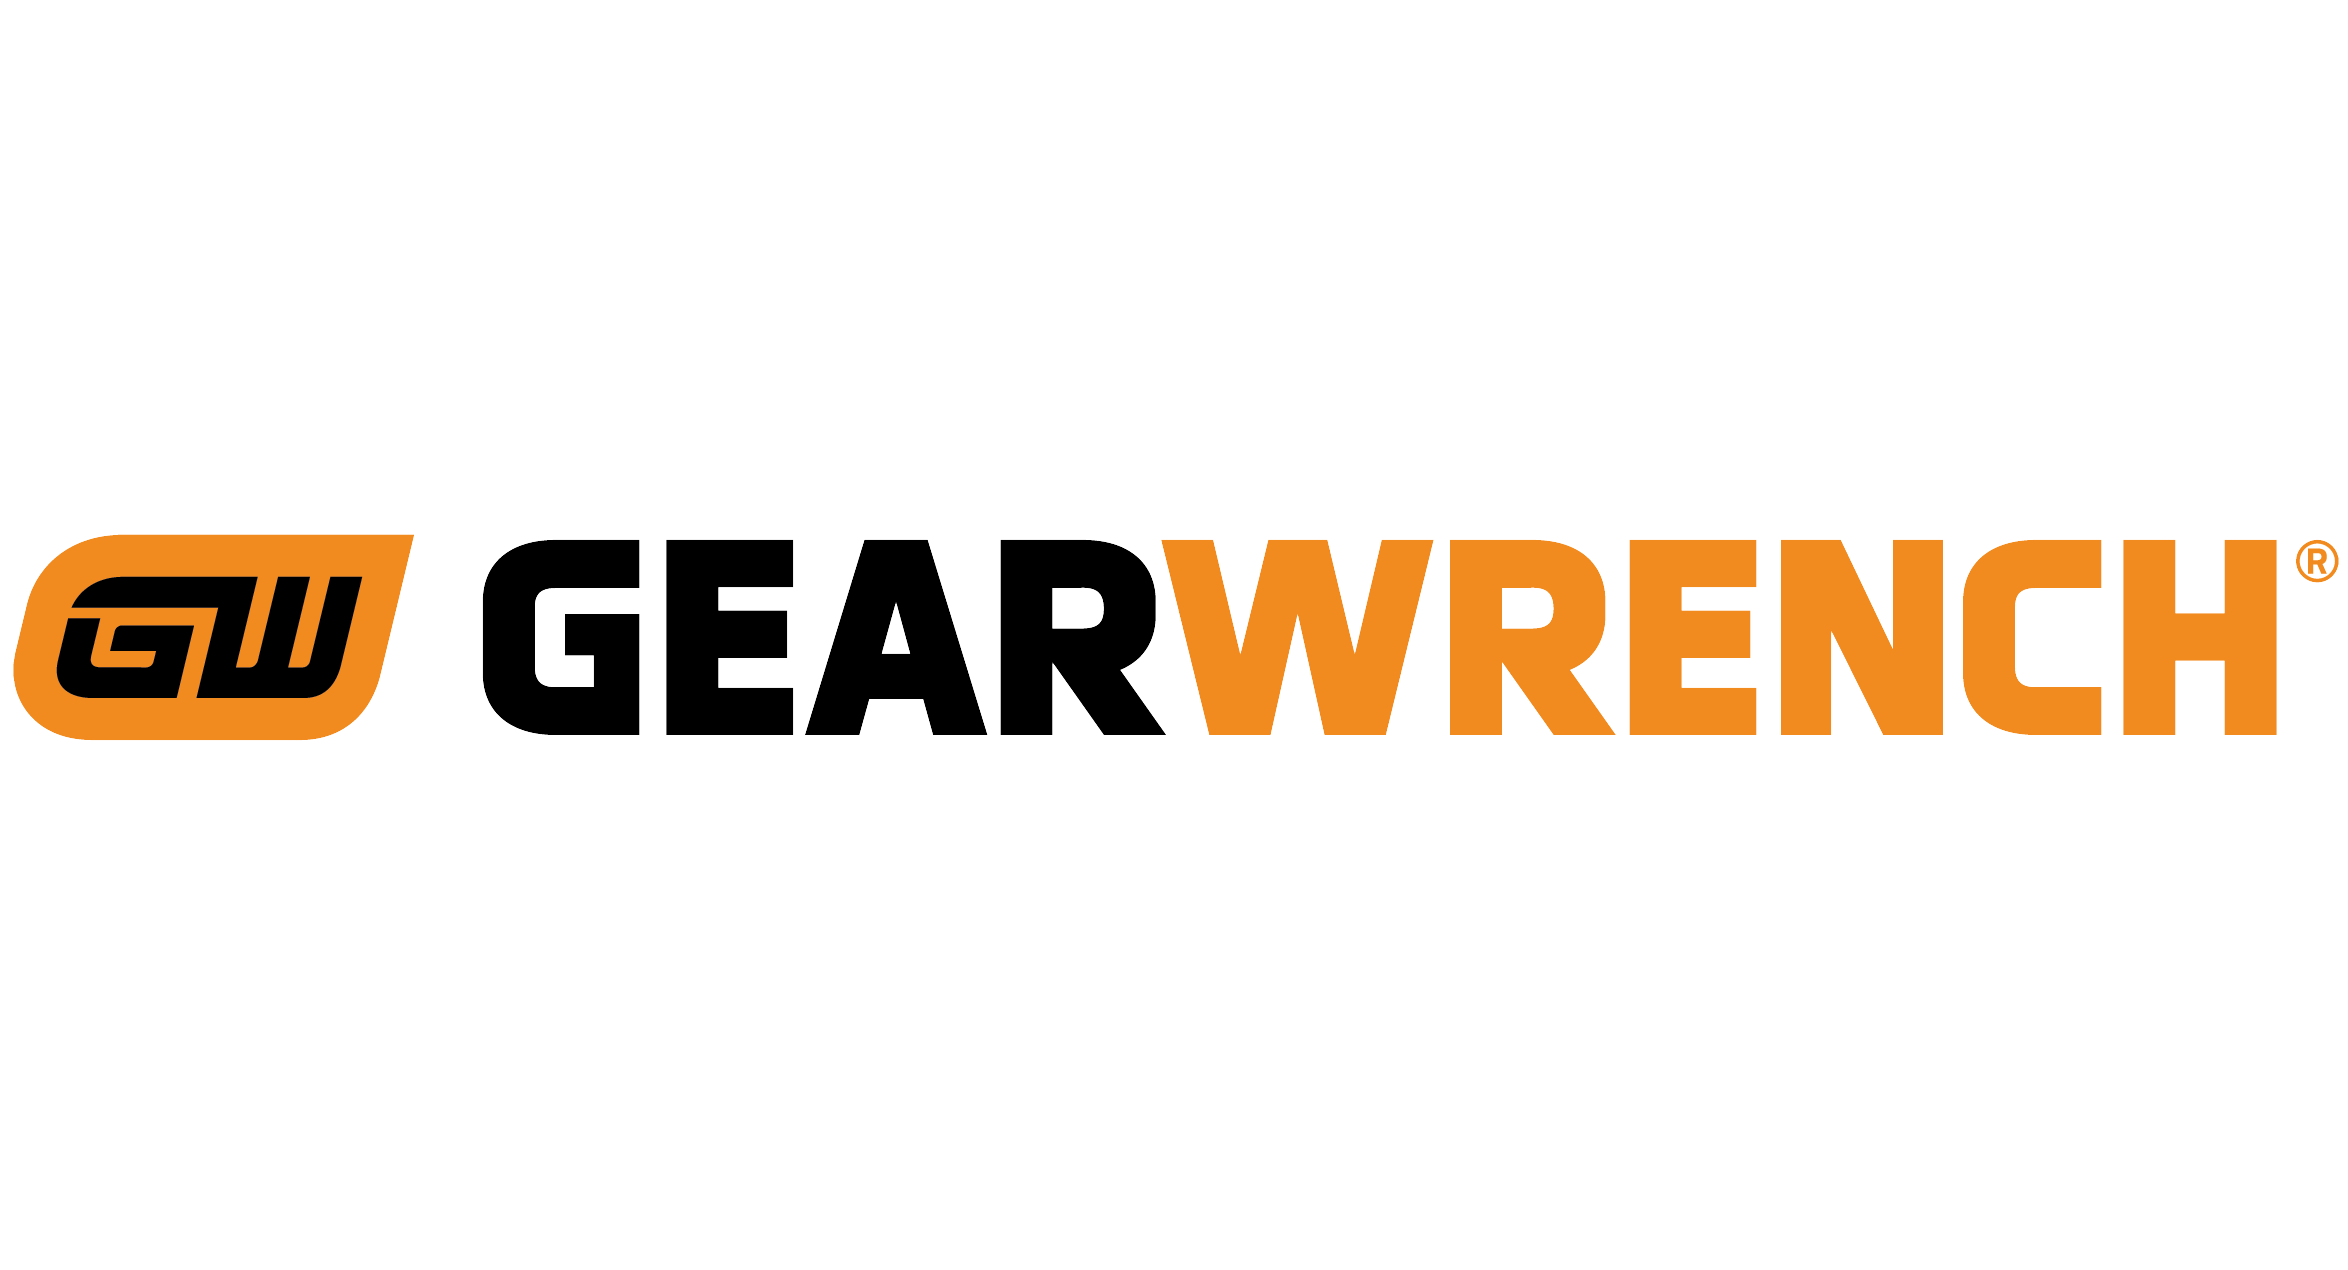 GearWrench Logo - Buy GEARWRENCH Online | GEARWRENCH Hand Tools, Hand Tool Sets